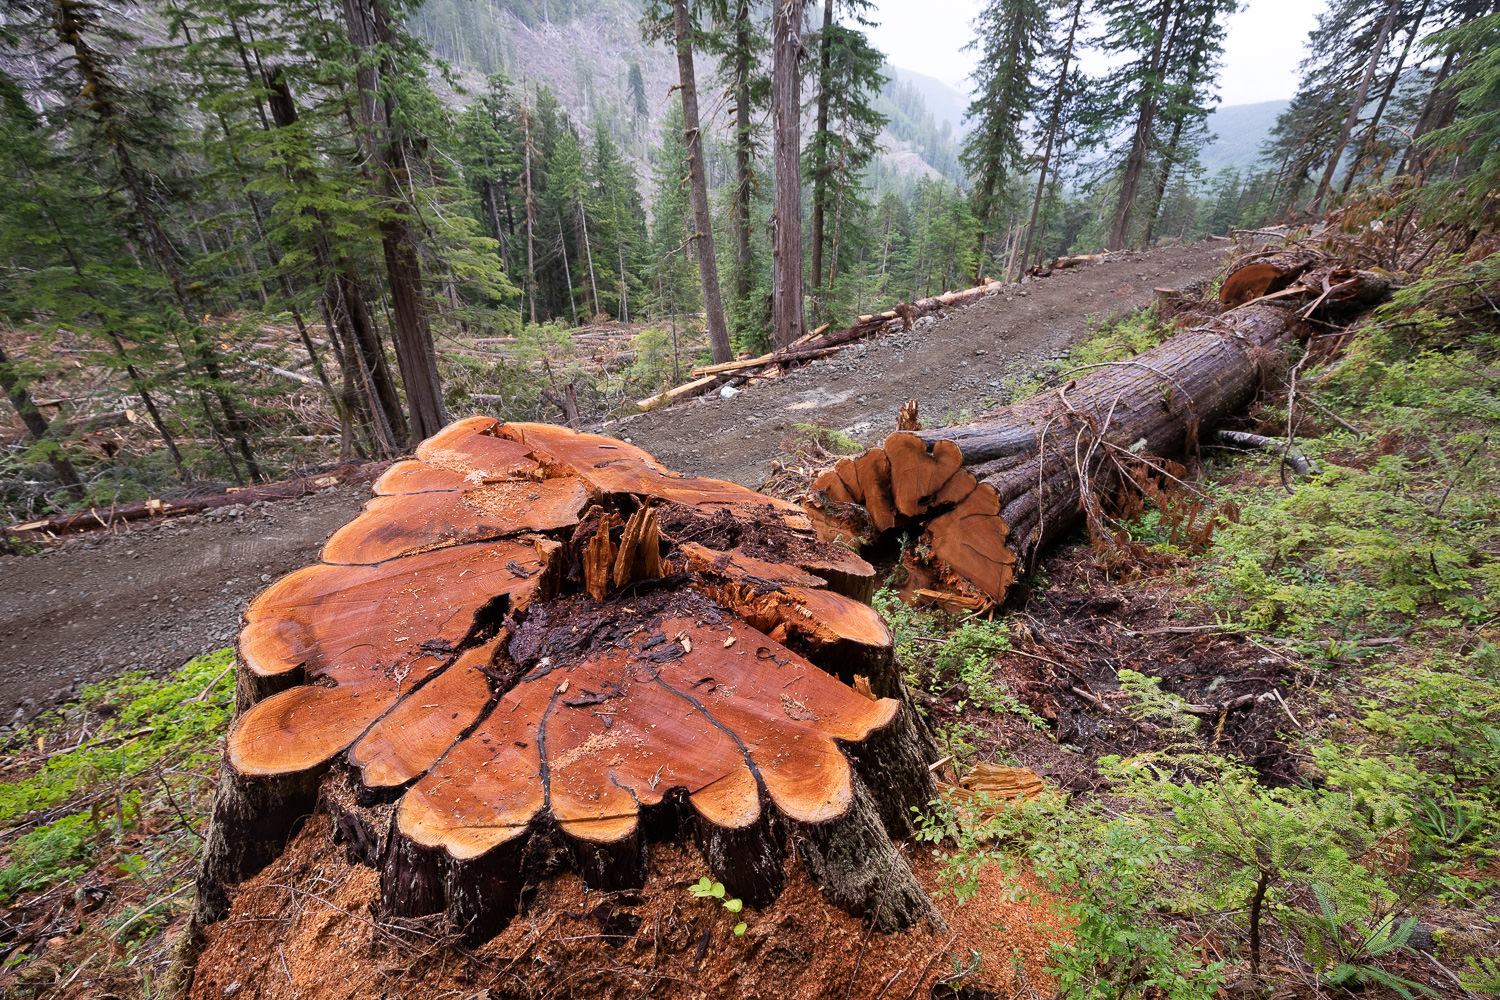 Grassroots Forest Defenders Establish Third Blockade to Defend Vancouver Island Old Growth Forest